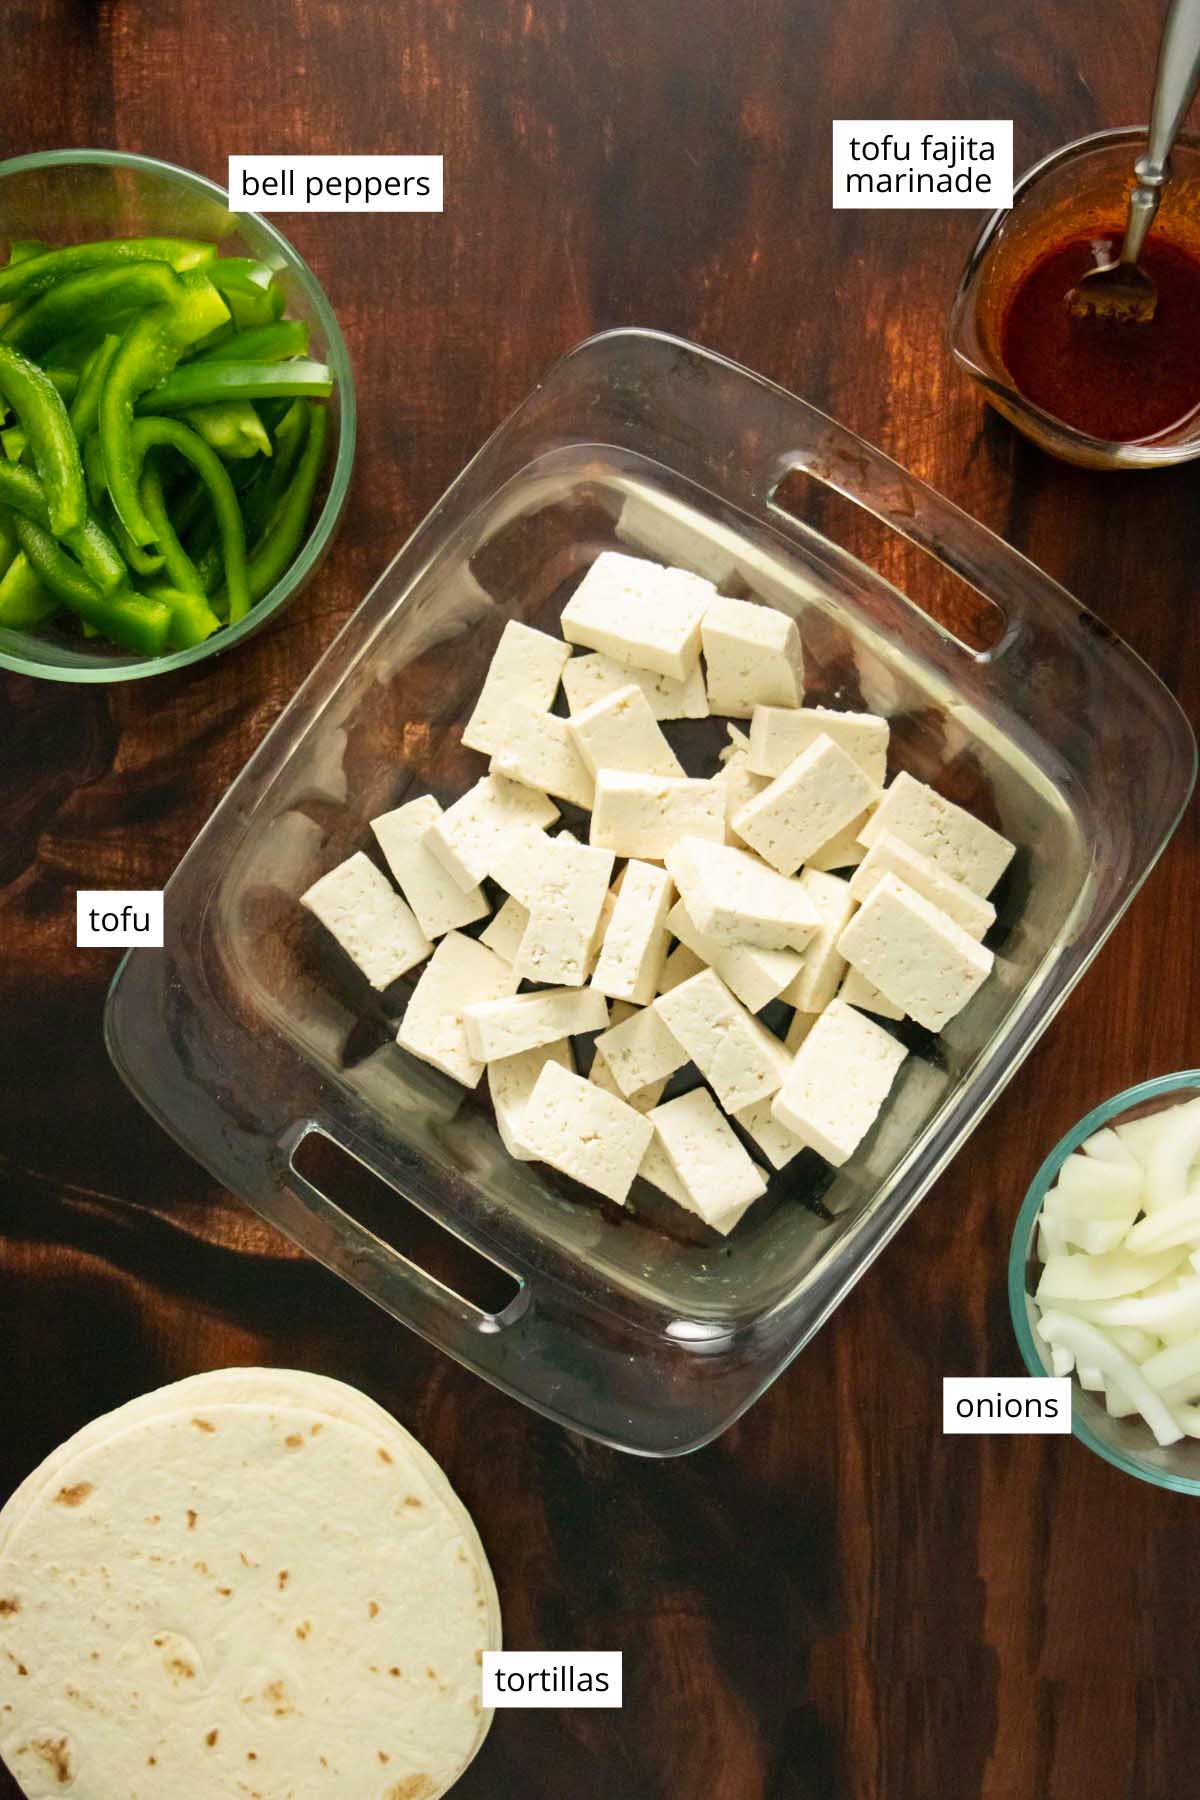 tofu, veggies, tortillas, and the tofu fajitas marinade in containers on a wooden table